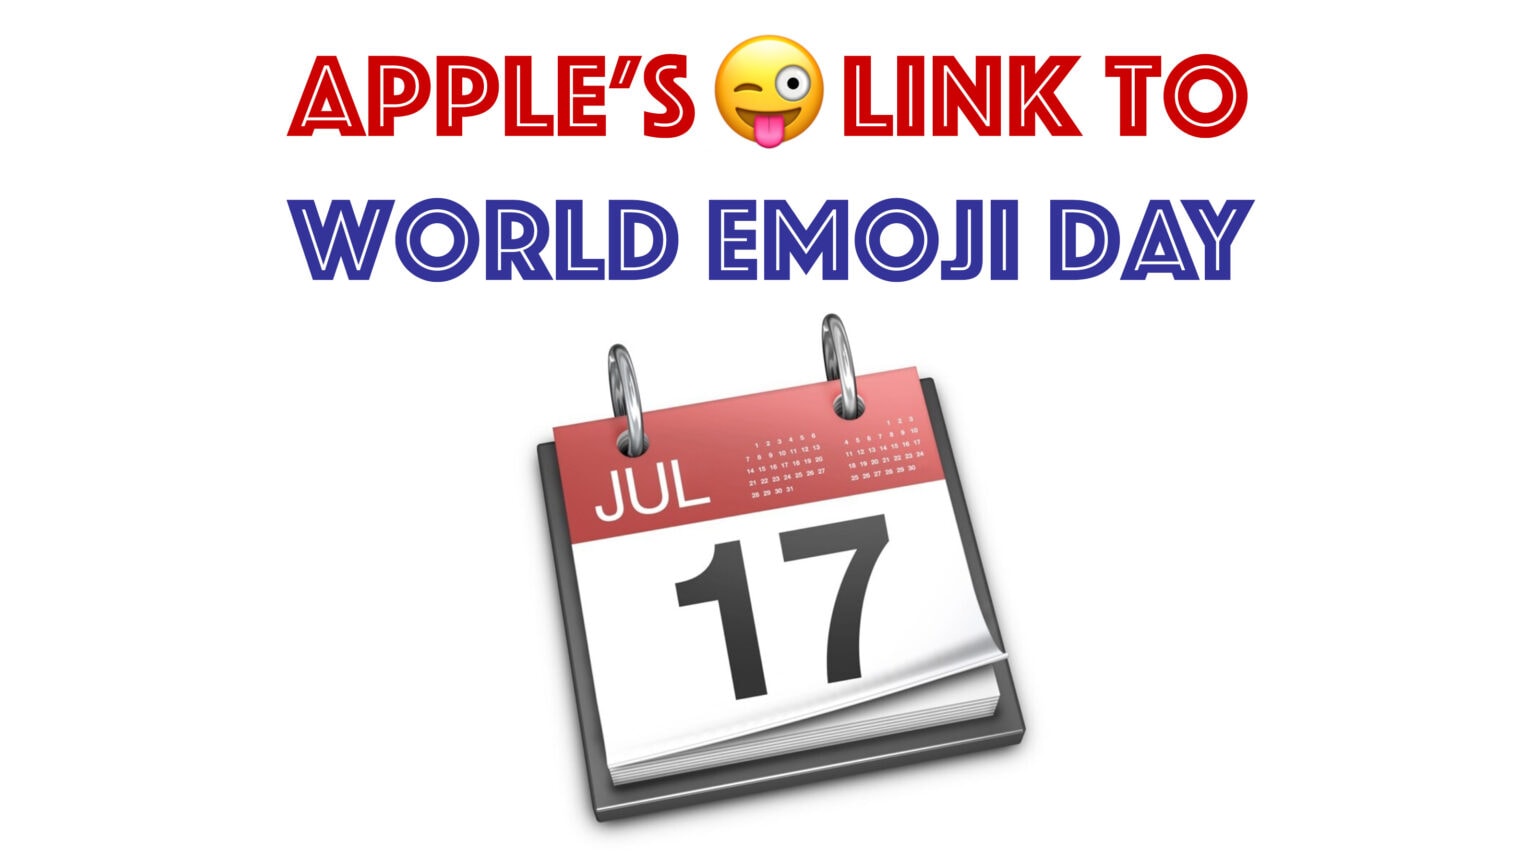 The roots of World Emoji Day go deep into Apple history.